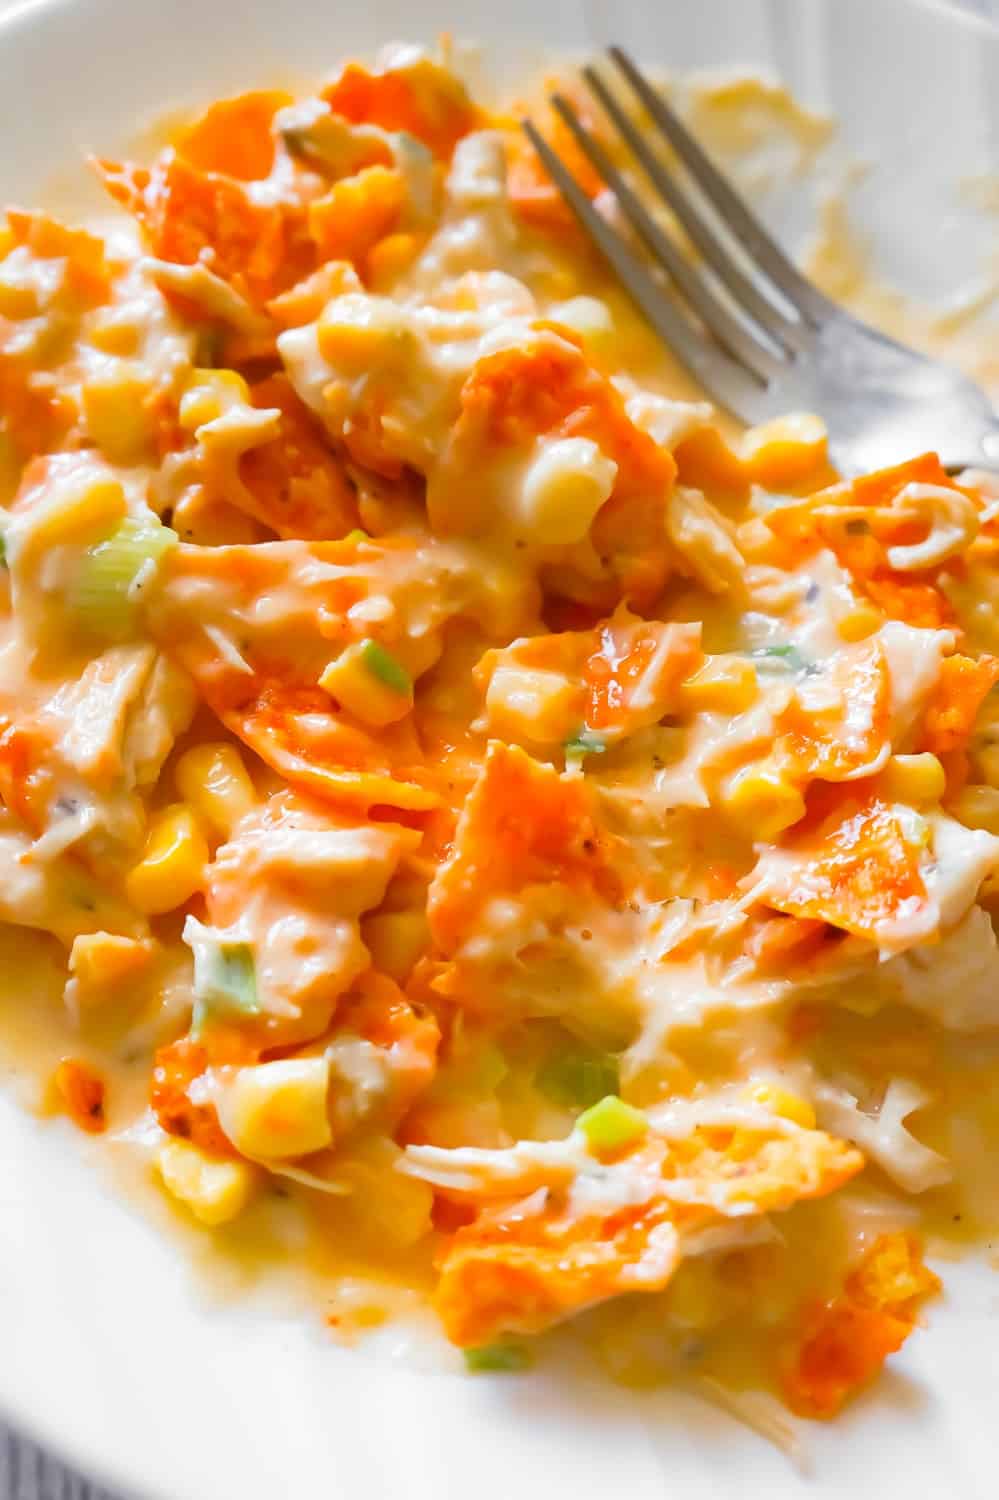 Instant Pot Doritos Chicken Casserole is an easy chicken dinner recipe the whole family will love. This creamy chicken casserole is loaded with corn, green onions, cream cheese, mozzarella and cheddar cheese.